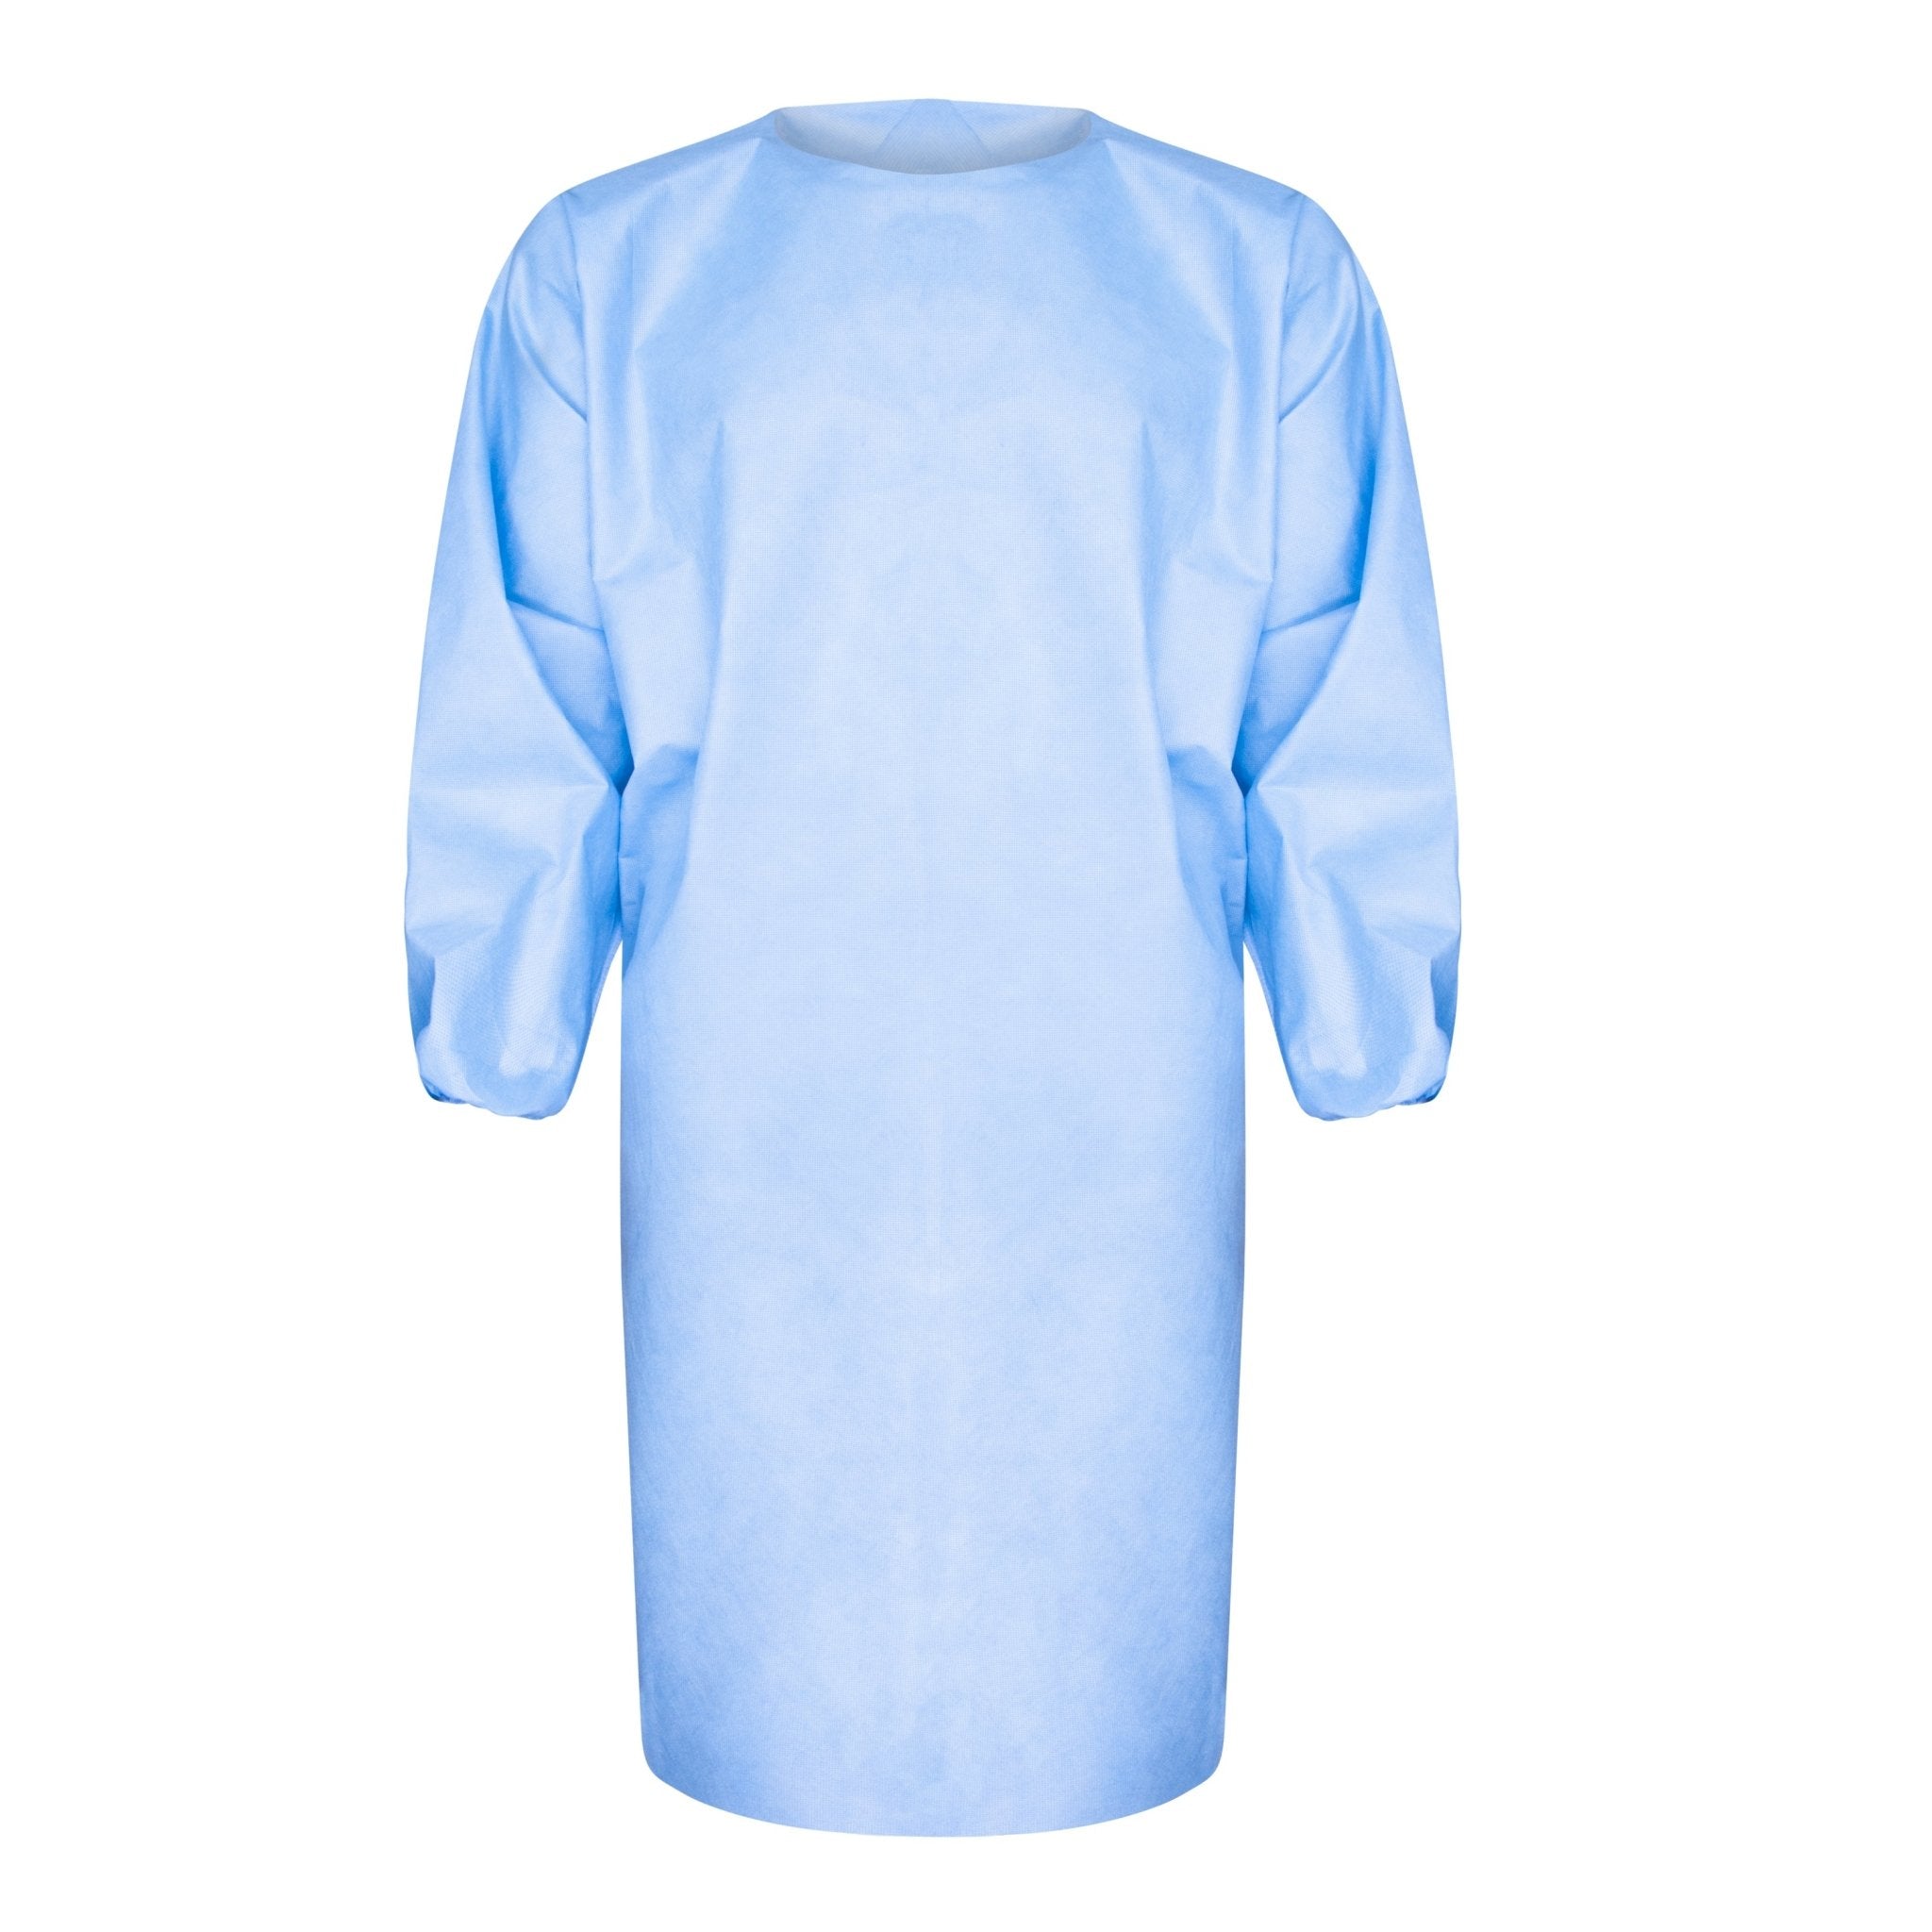 Deluxe Level 2 Isolation Gowns - Disposable - 25 Pack – DisposableGowns.com